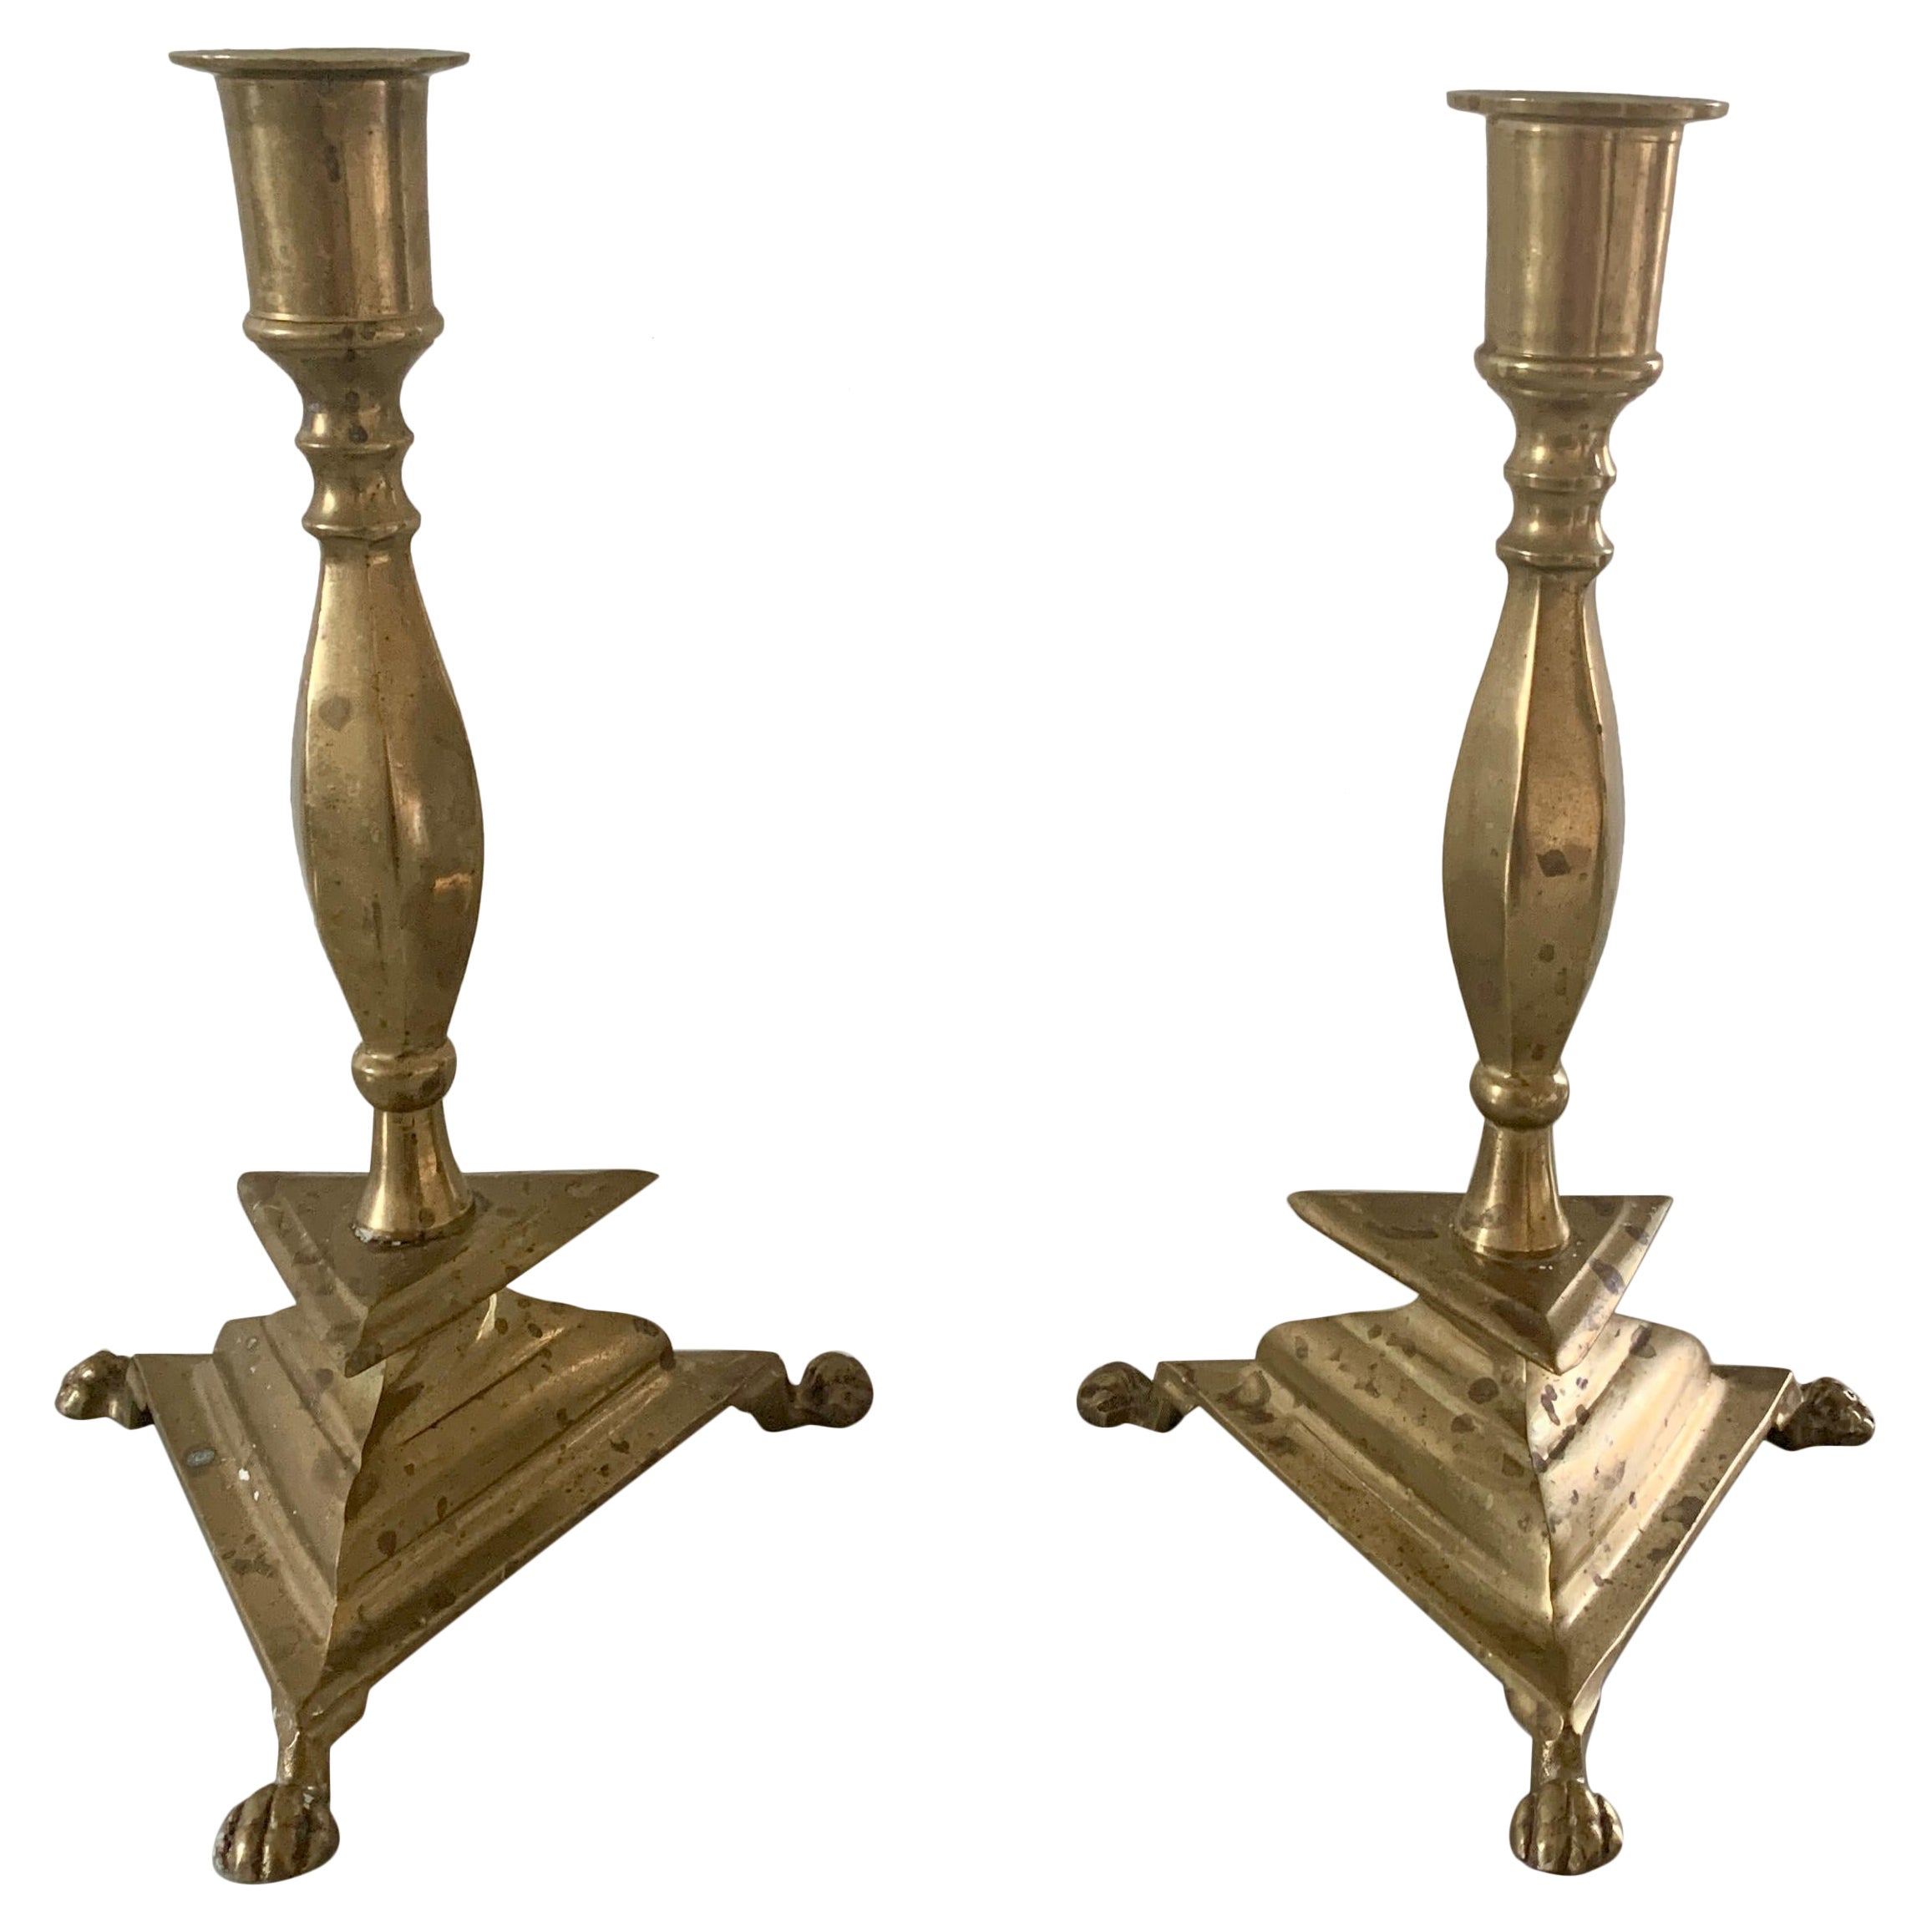 Neoclassical Brass Paw Foot Candlestick Holders, Pair For Sale